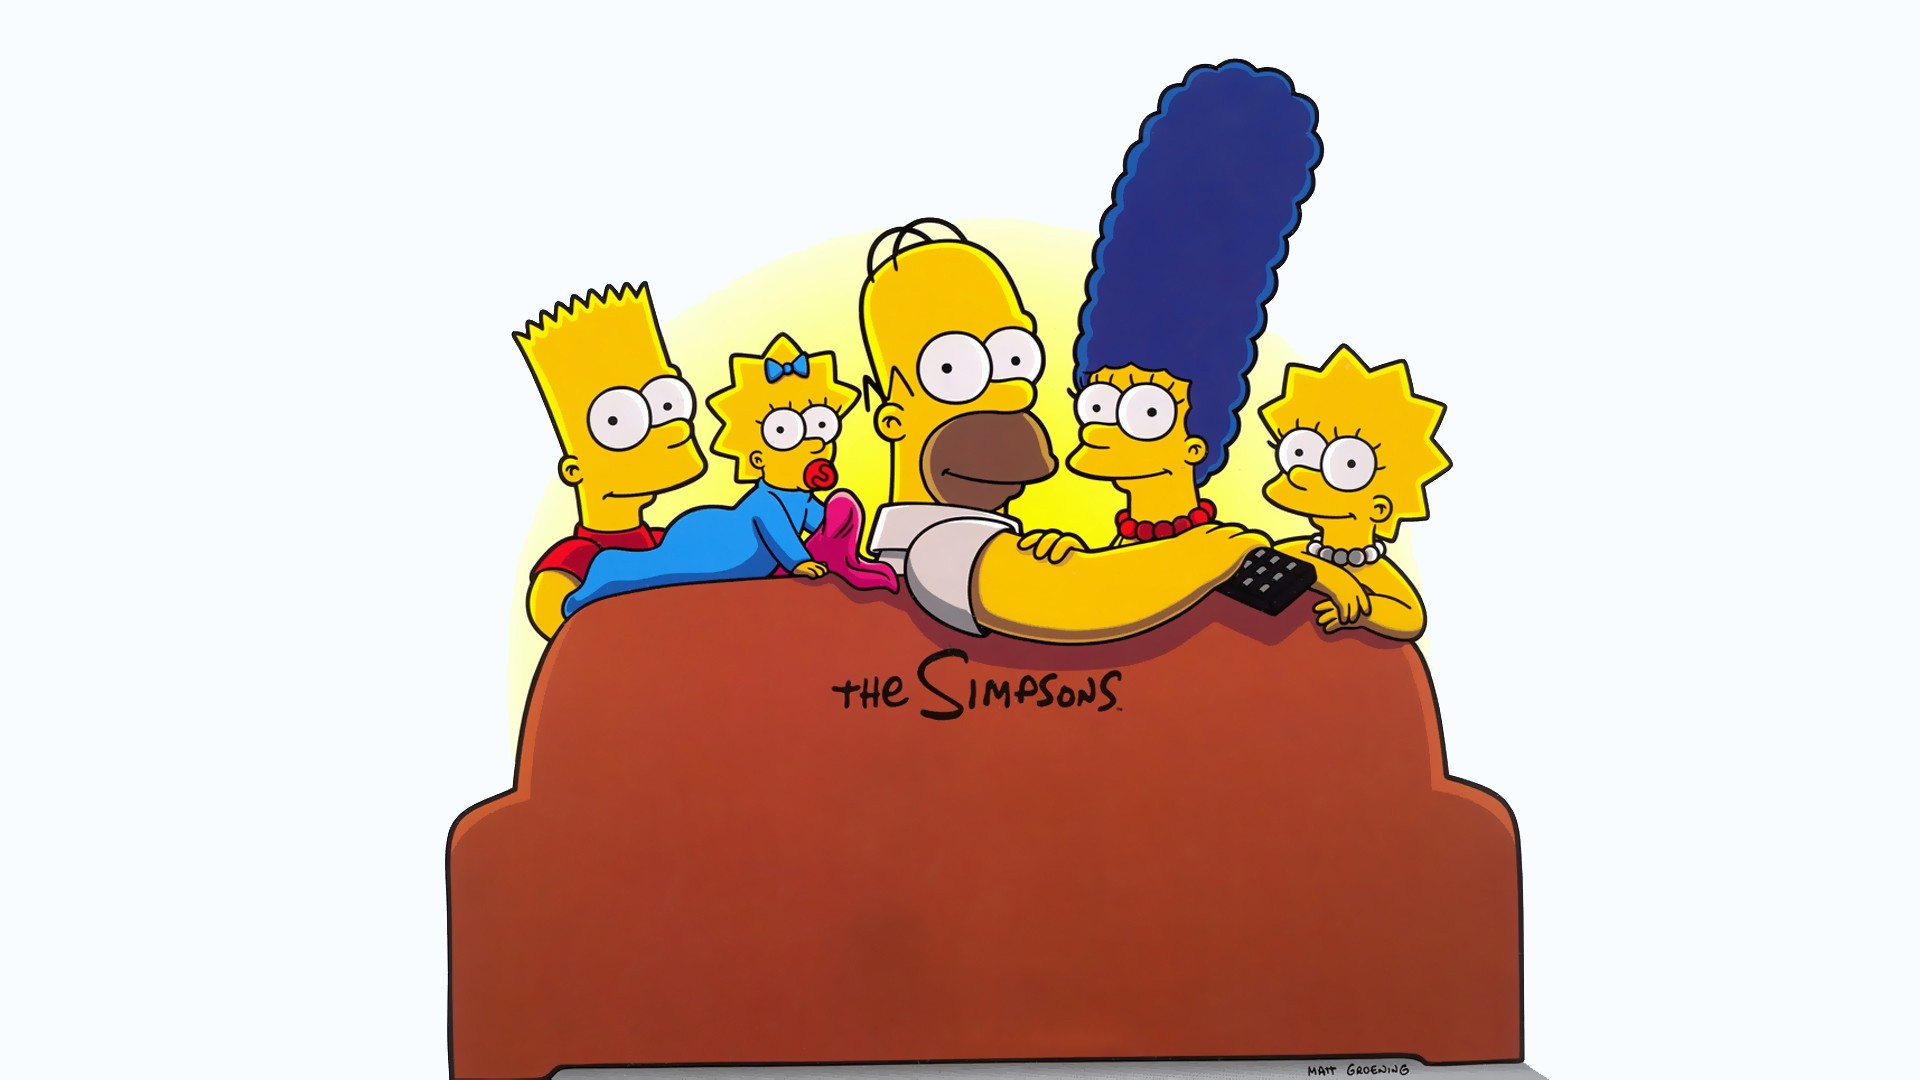 The Simpsons Homer Simpson Bart Simpson Marge Simpson Lisa Simpson Maggie Simpson Couch 1920x1080